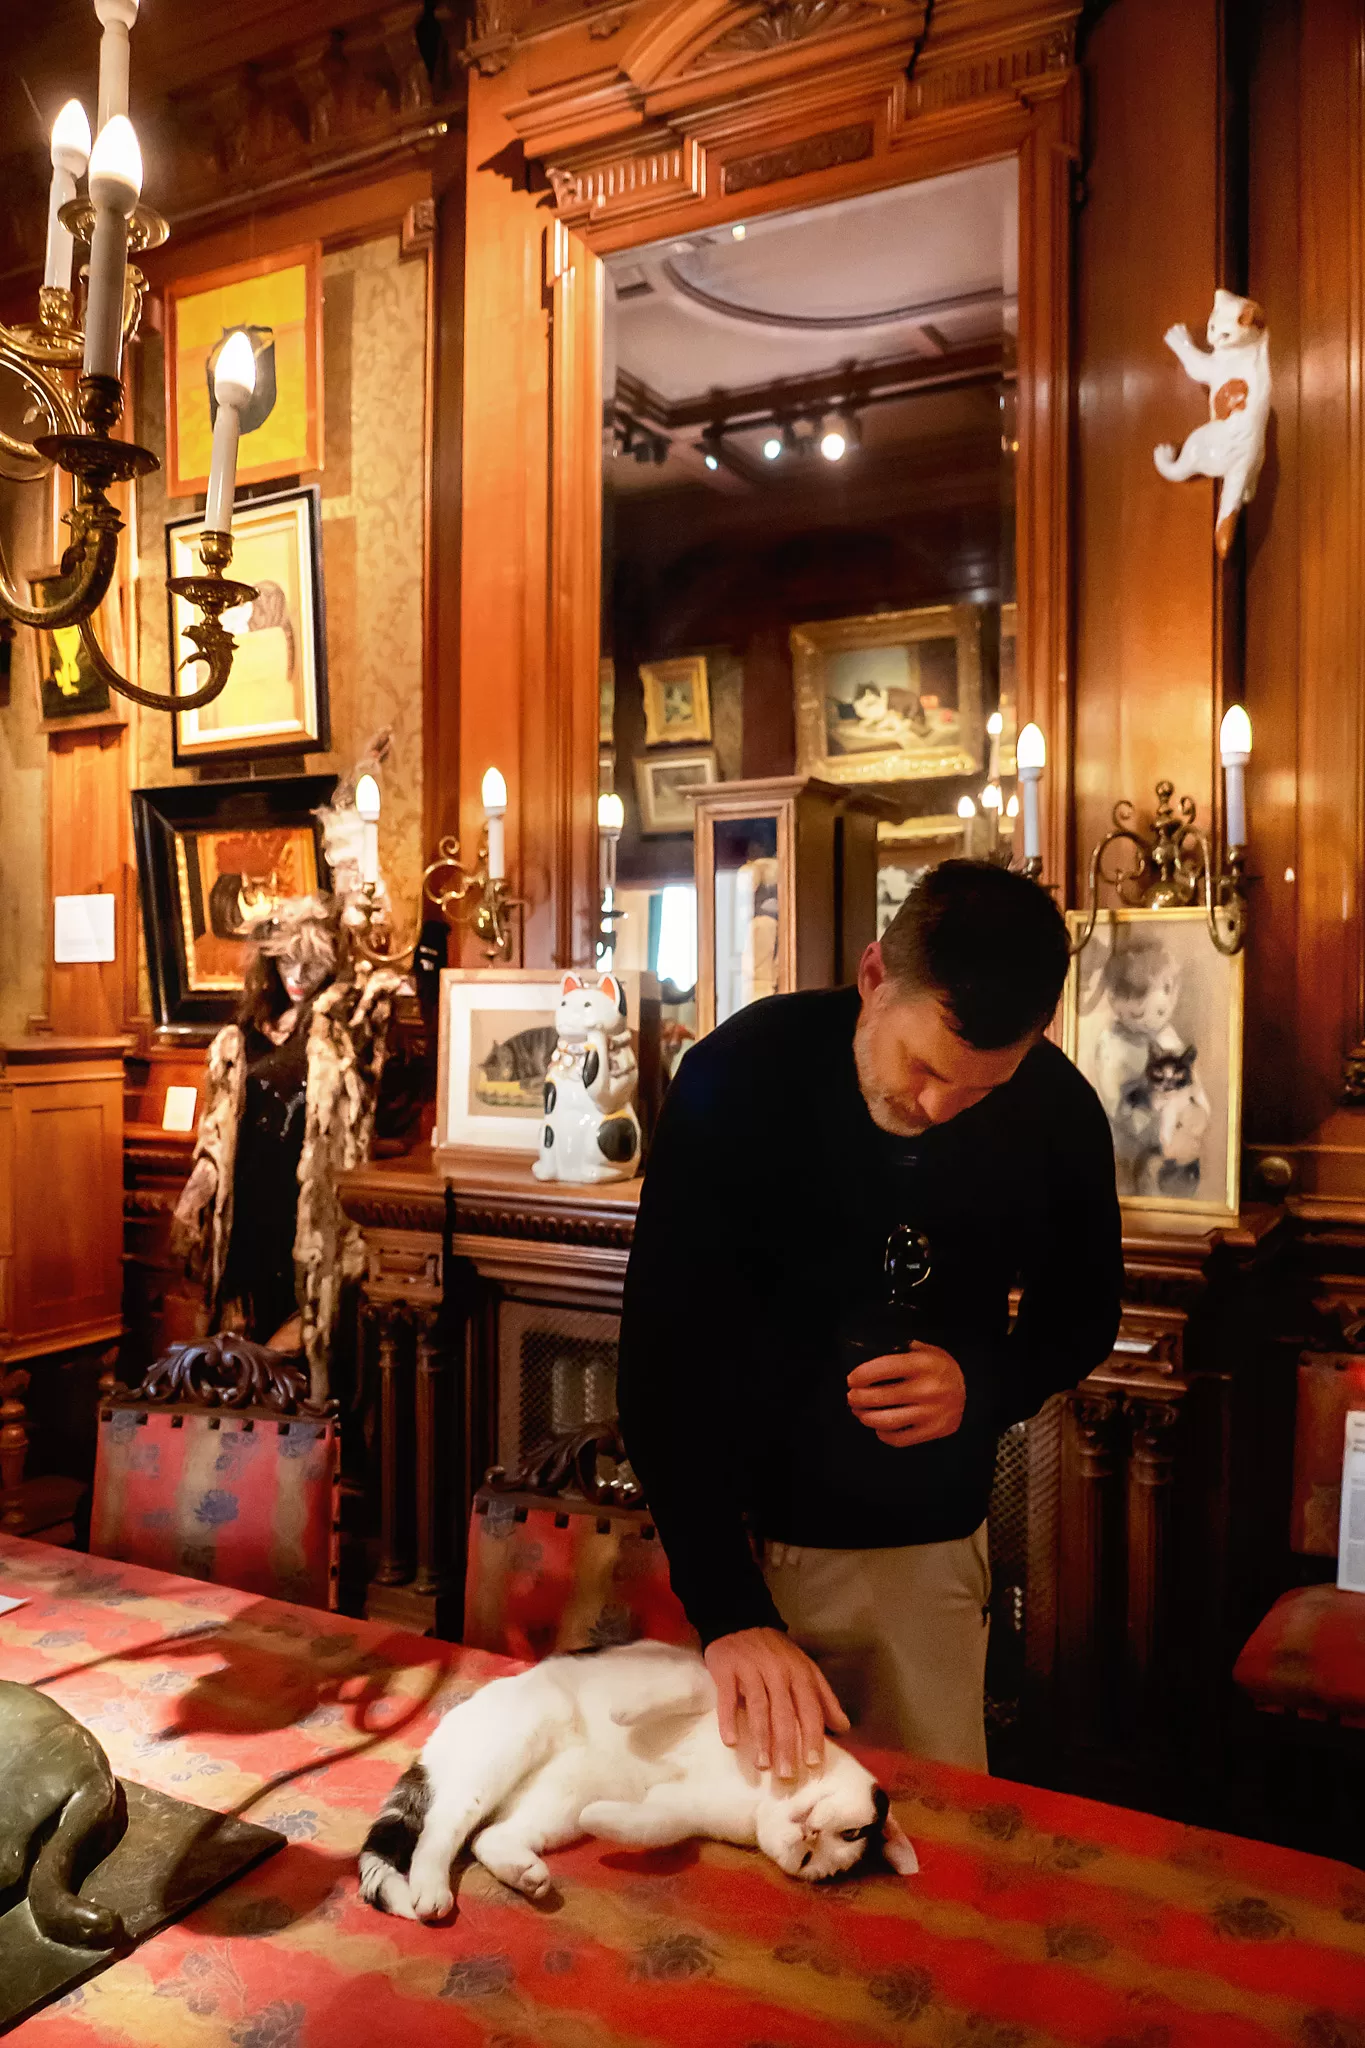 A blog post about visiting the amsterdam cat museum. This photo shows a man petting a cat inside this Amsterdam museum.